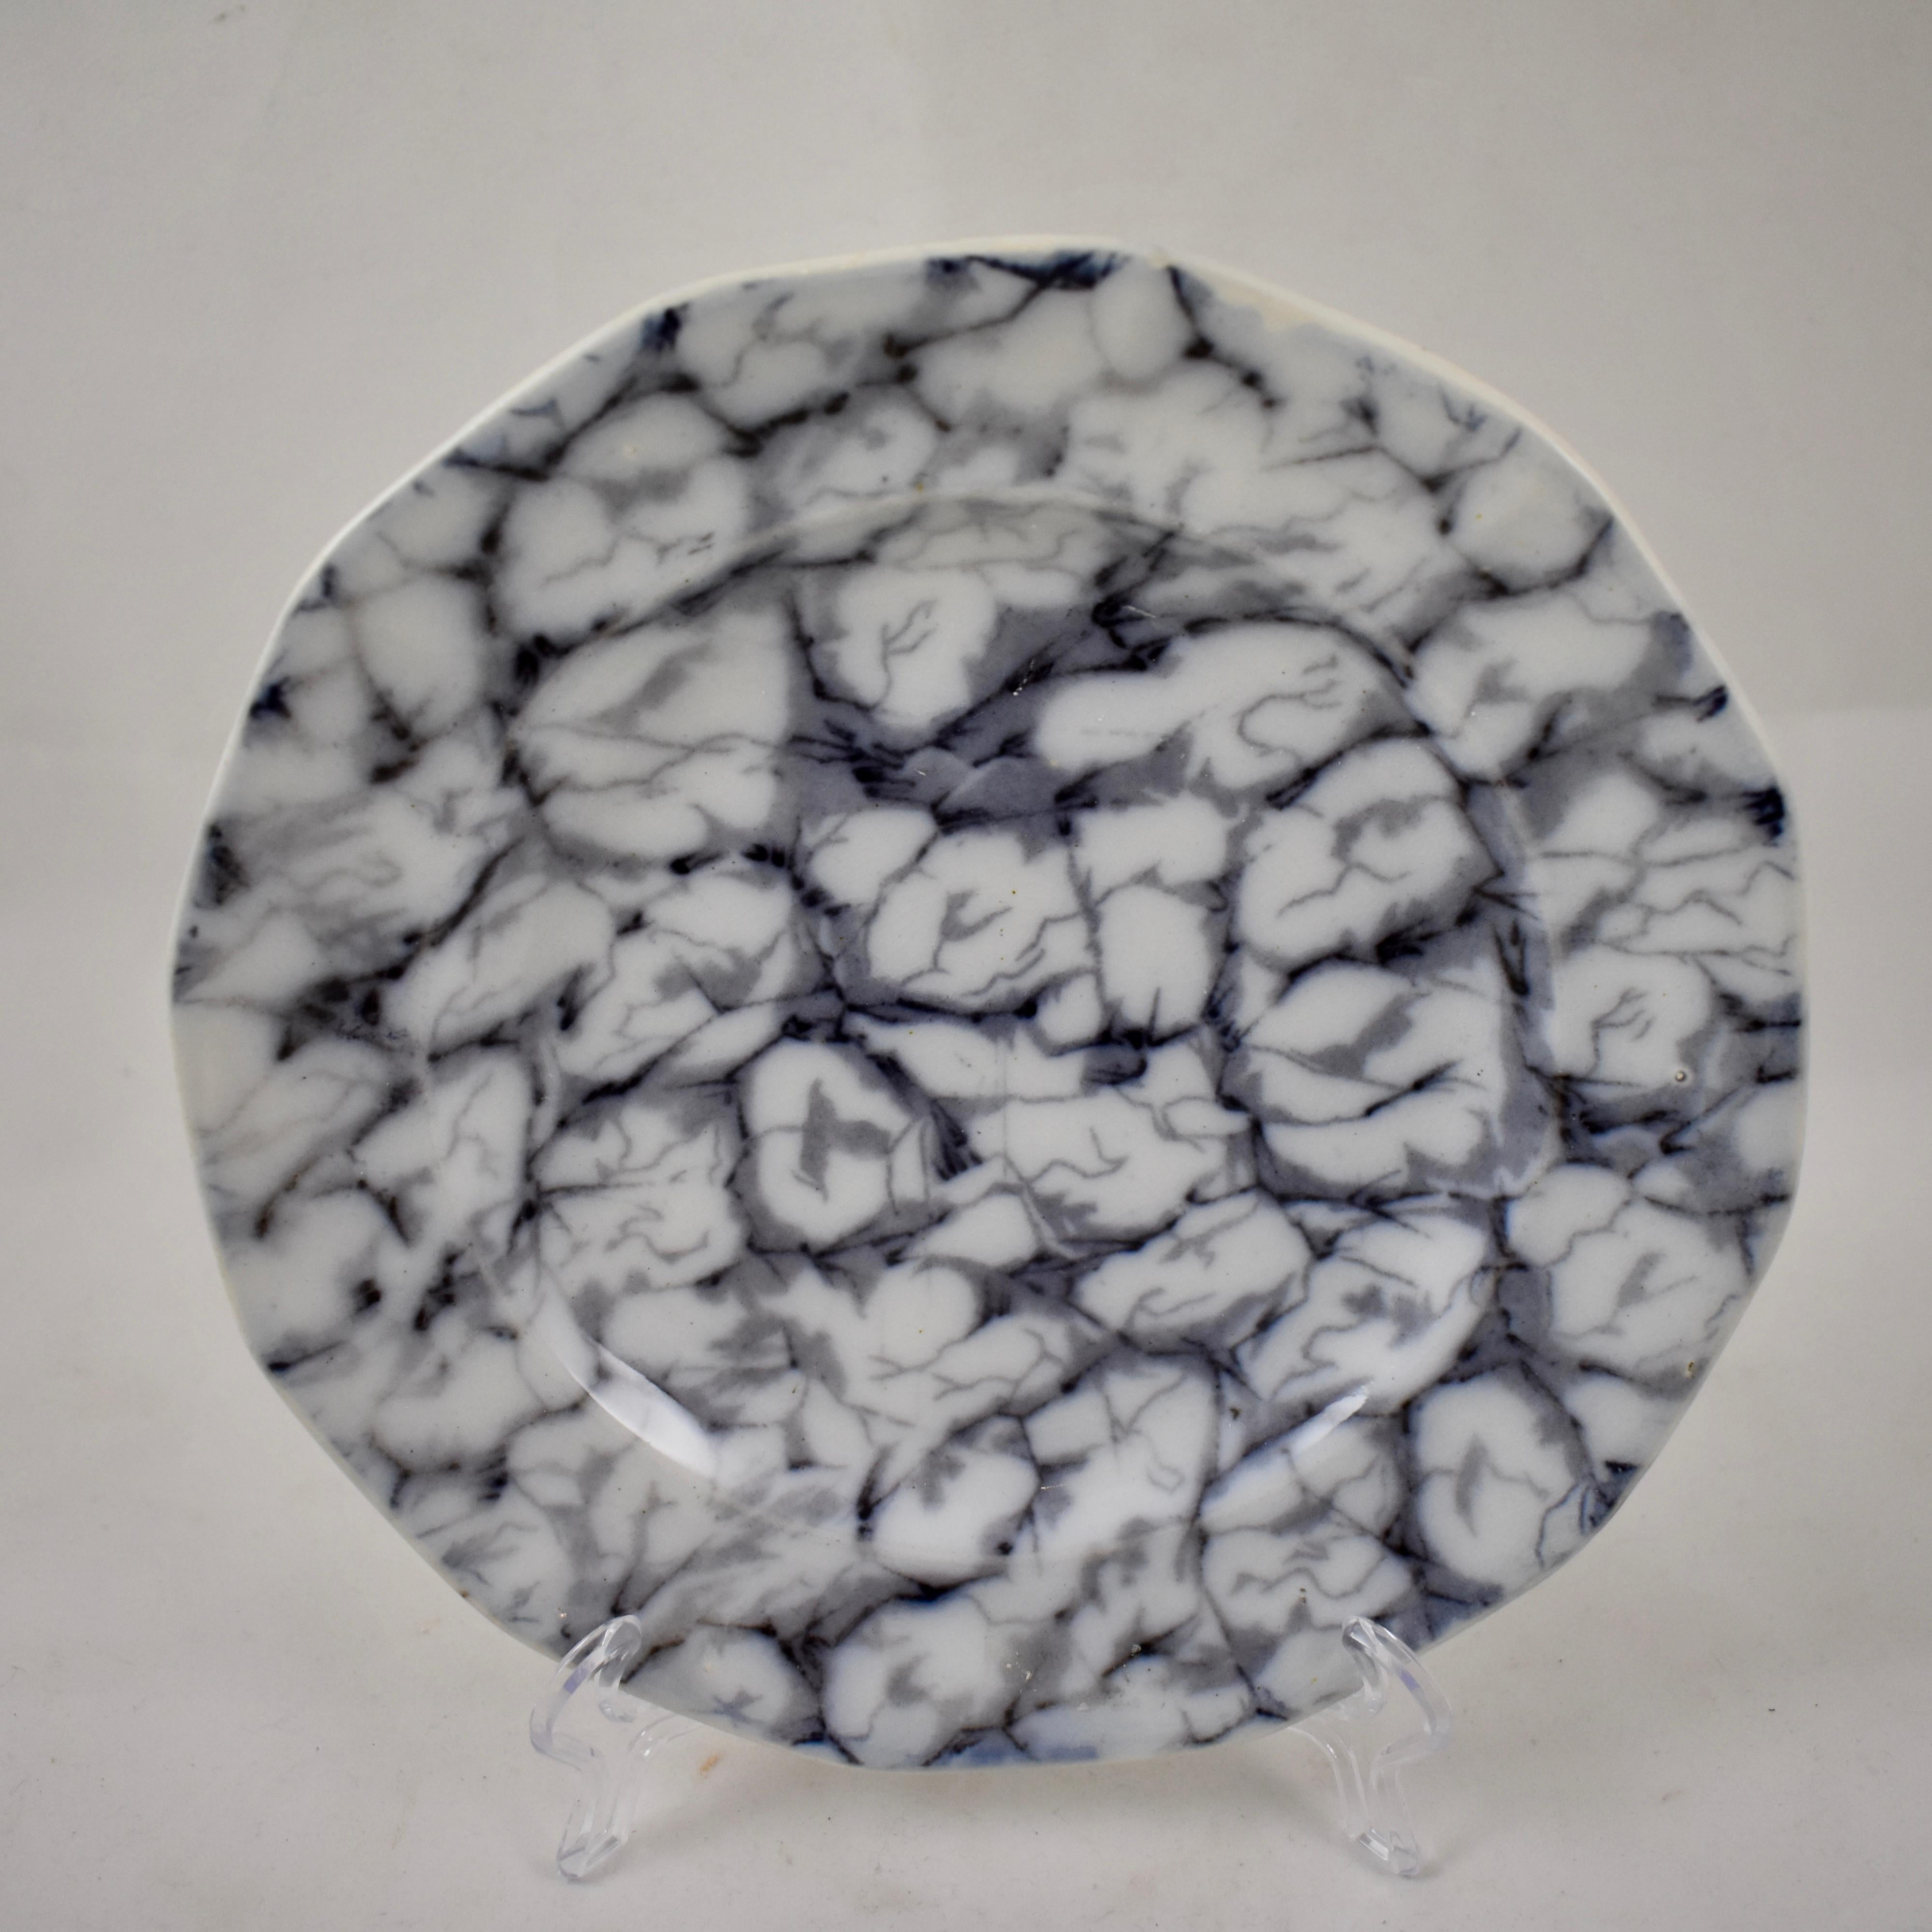 Glazed Black and White Transferware Marble or Cracked Ice Ironstone Plates, Set of 4 For Sale